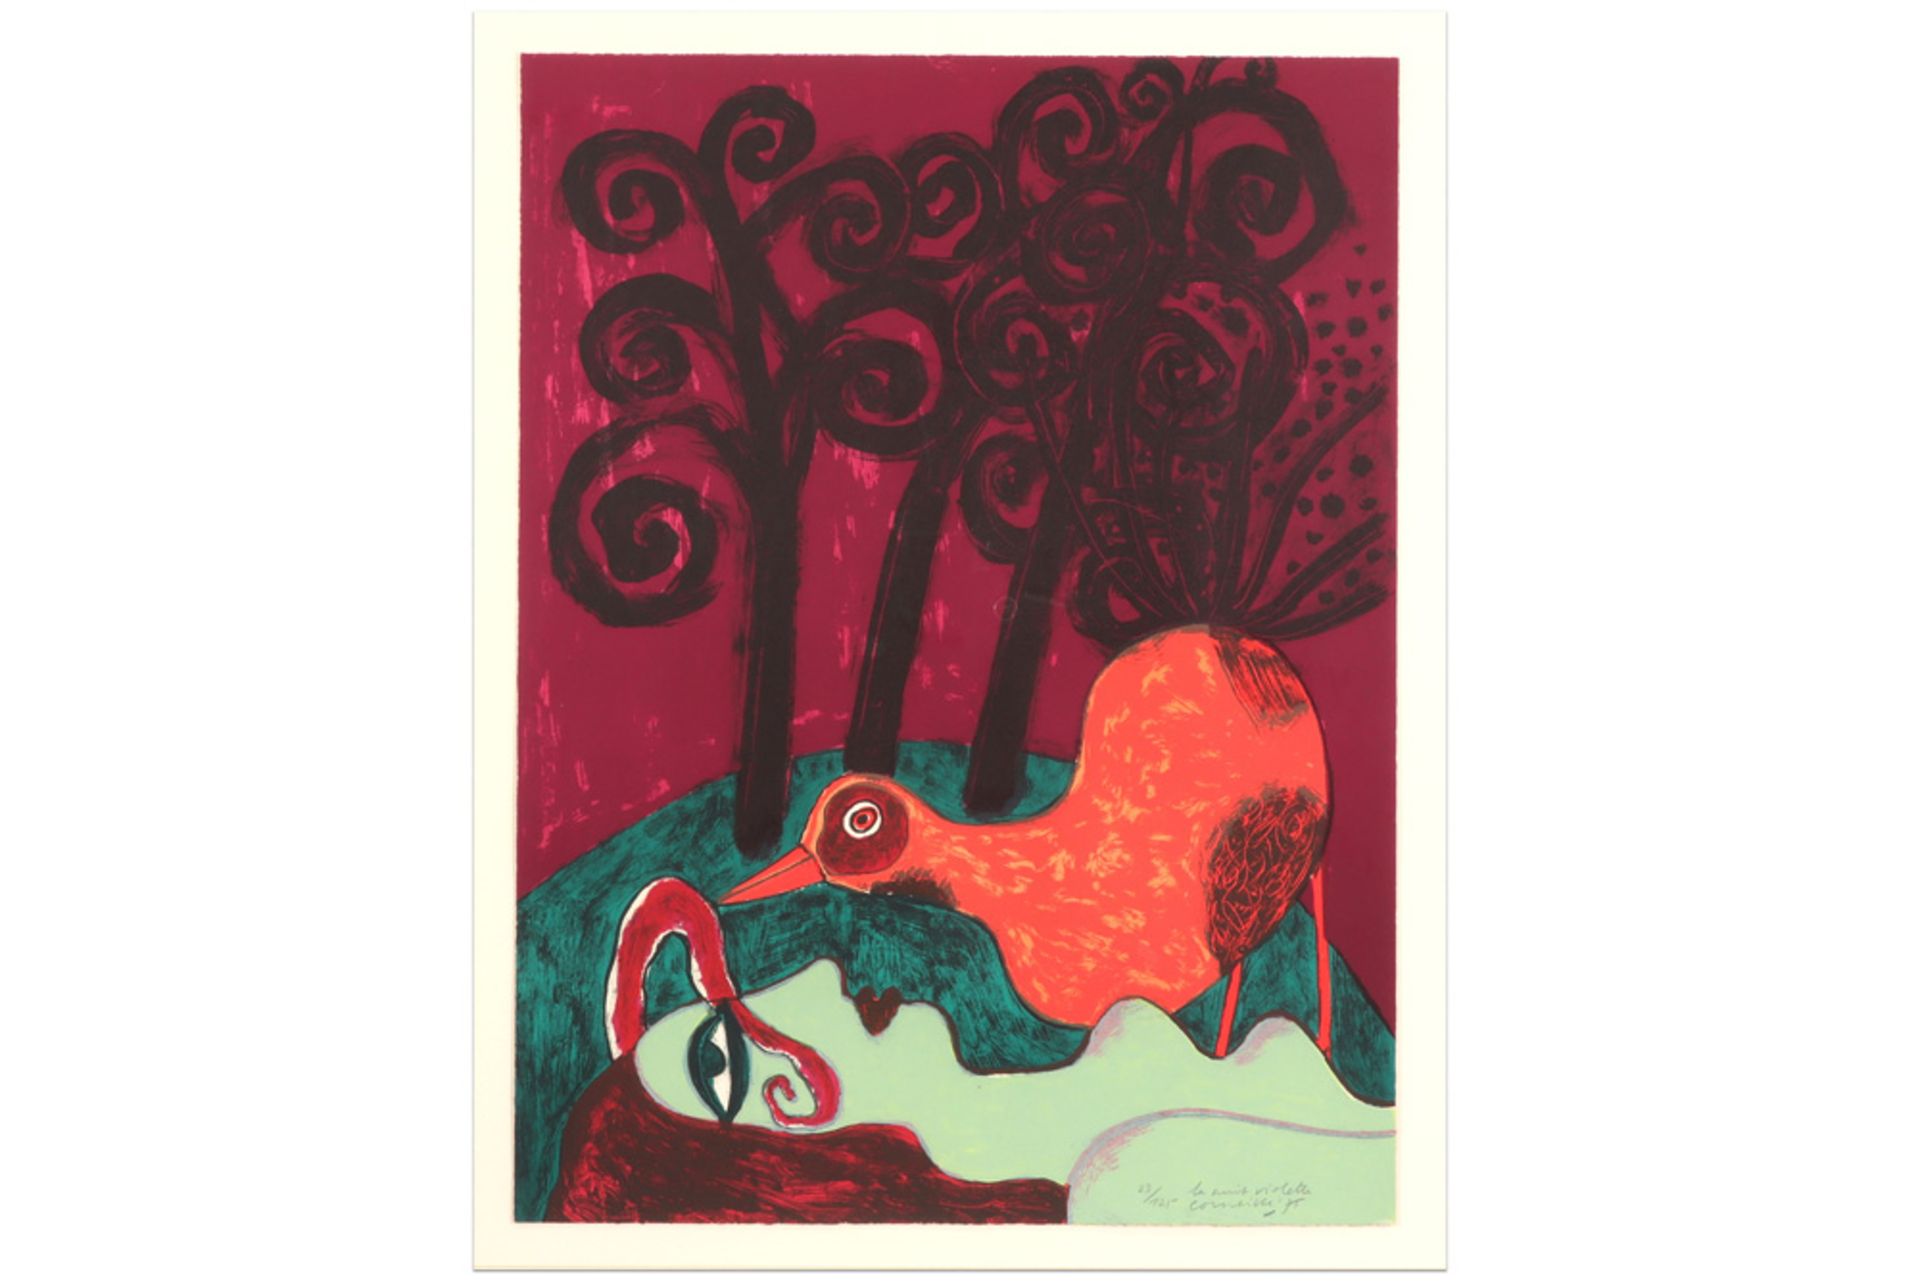 Corneille signed lithograph printed in colors - dated (19)75 ||CORNEILLE (1922 - 2010) (1922 - 2010)